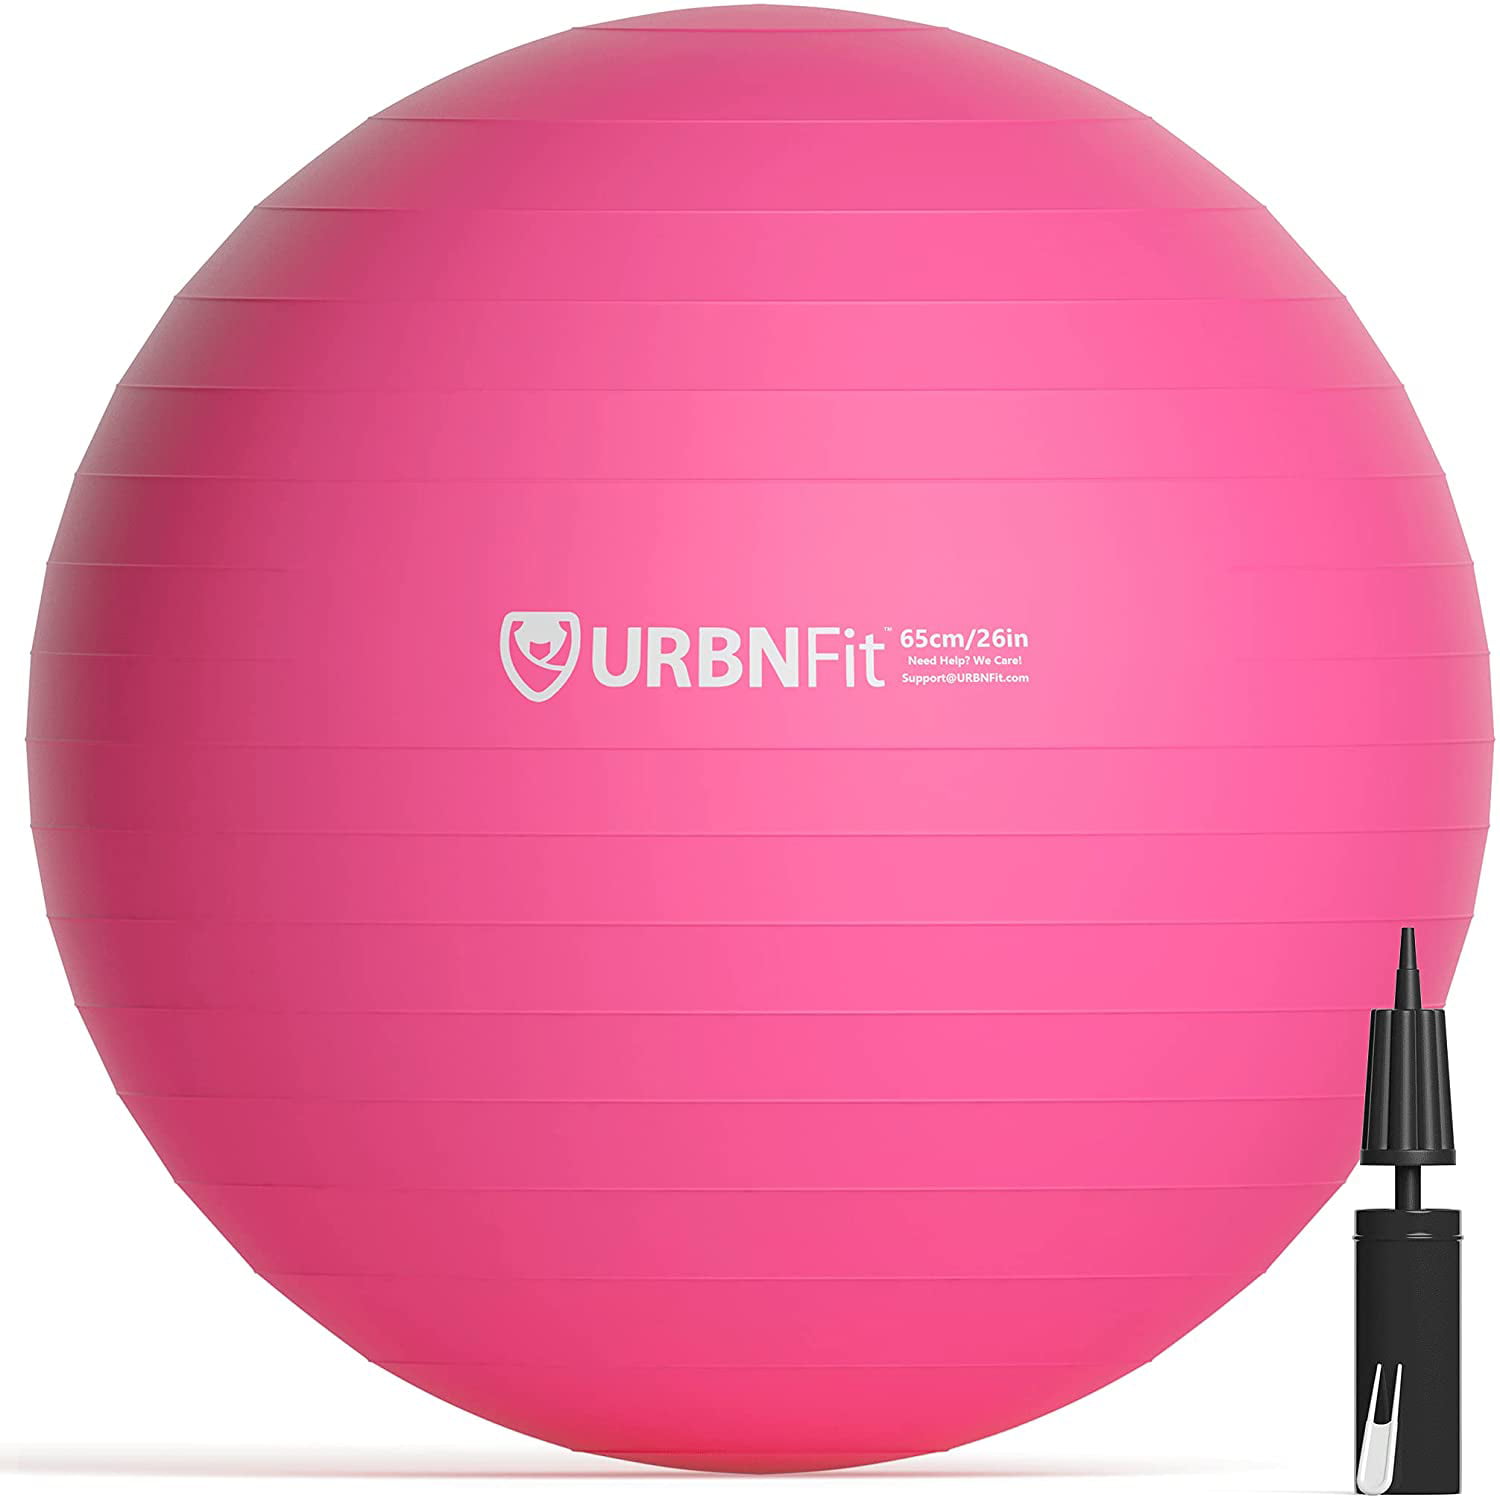 AntiBurst Swiss Balance Ball w/ Pump Fitness Ball Chair for Office URBNFit Exercise Ball Yoga Ball for Workout Pregnancy Stability Home Gym 